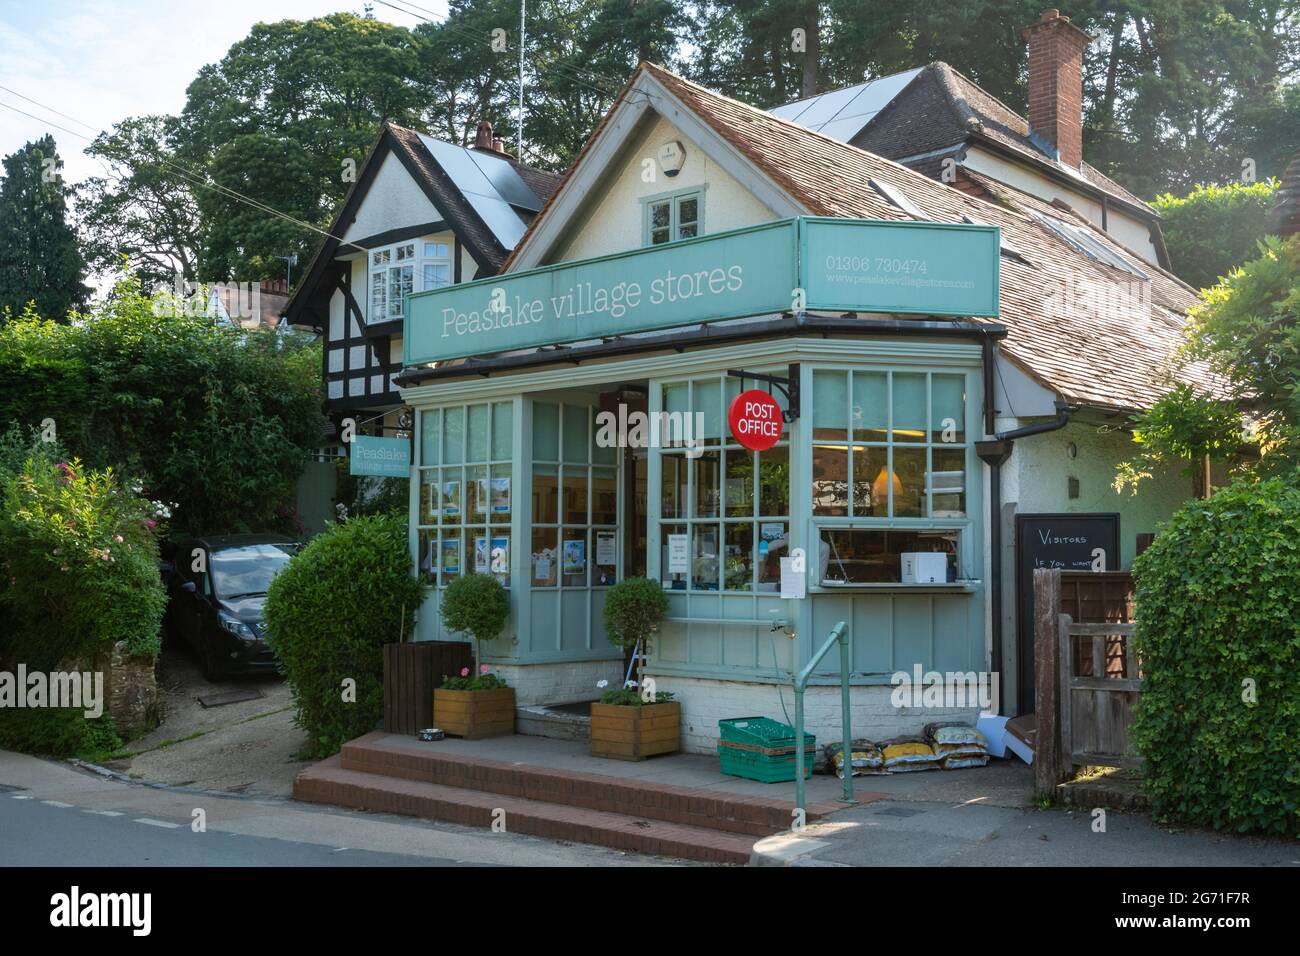 Peaslake village stores, a shop in the pretty village of Peaslake in the Surrey Hills AONB, England, UK Stock Photo